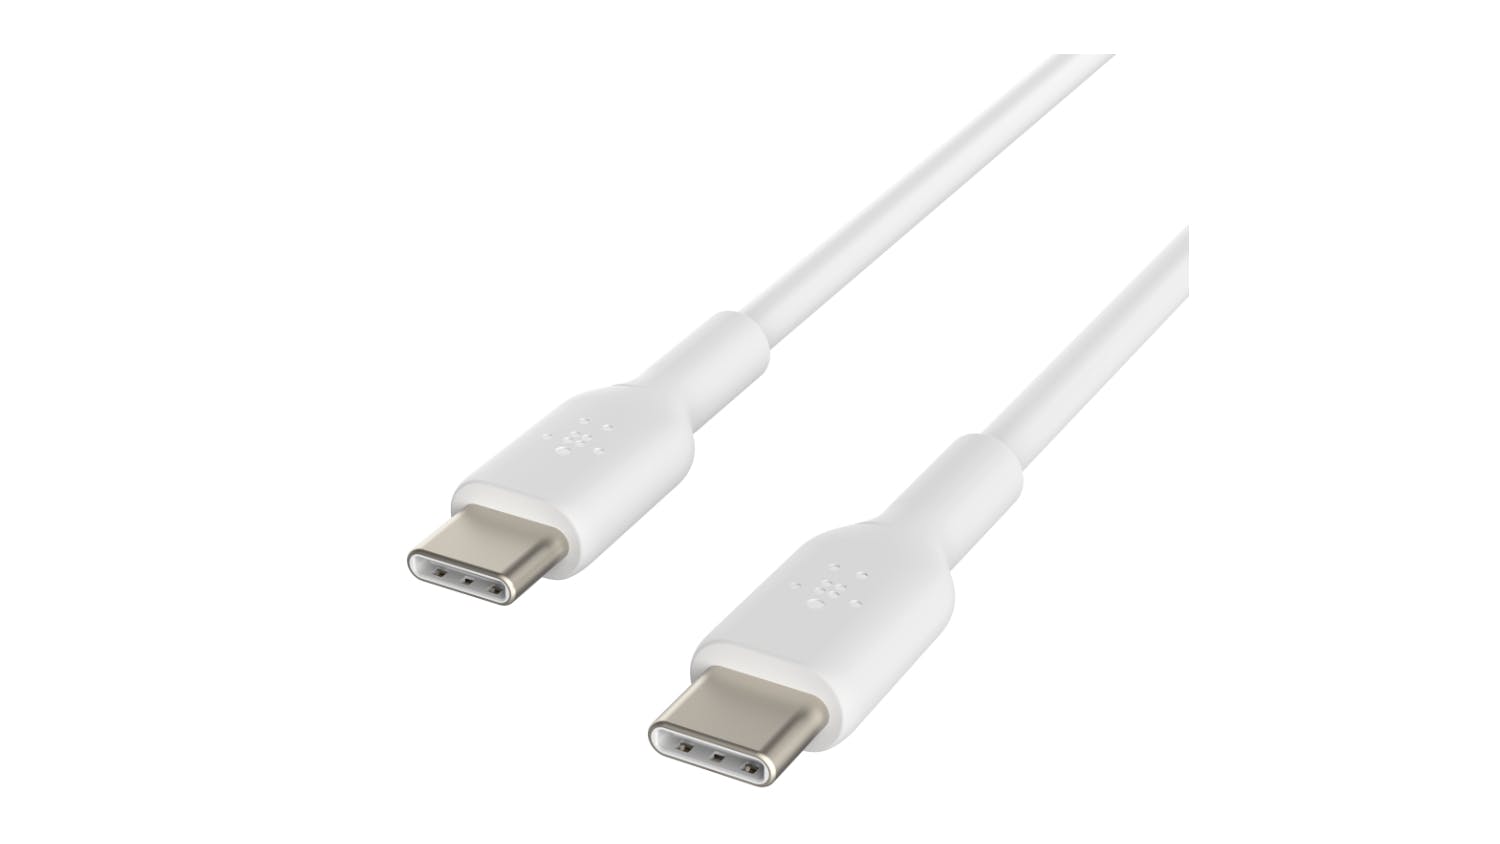 Belkin Boost Up Charge USB-C to USB-C Cable 2m - White